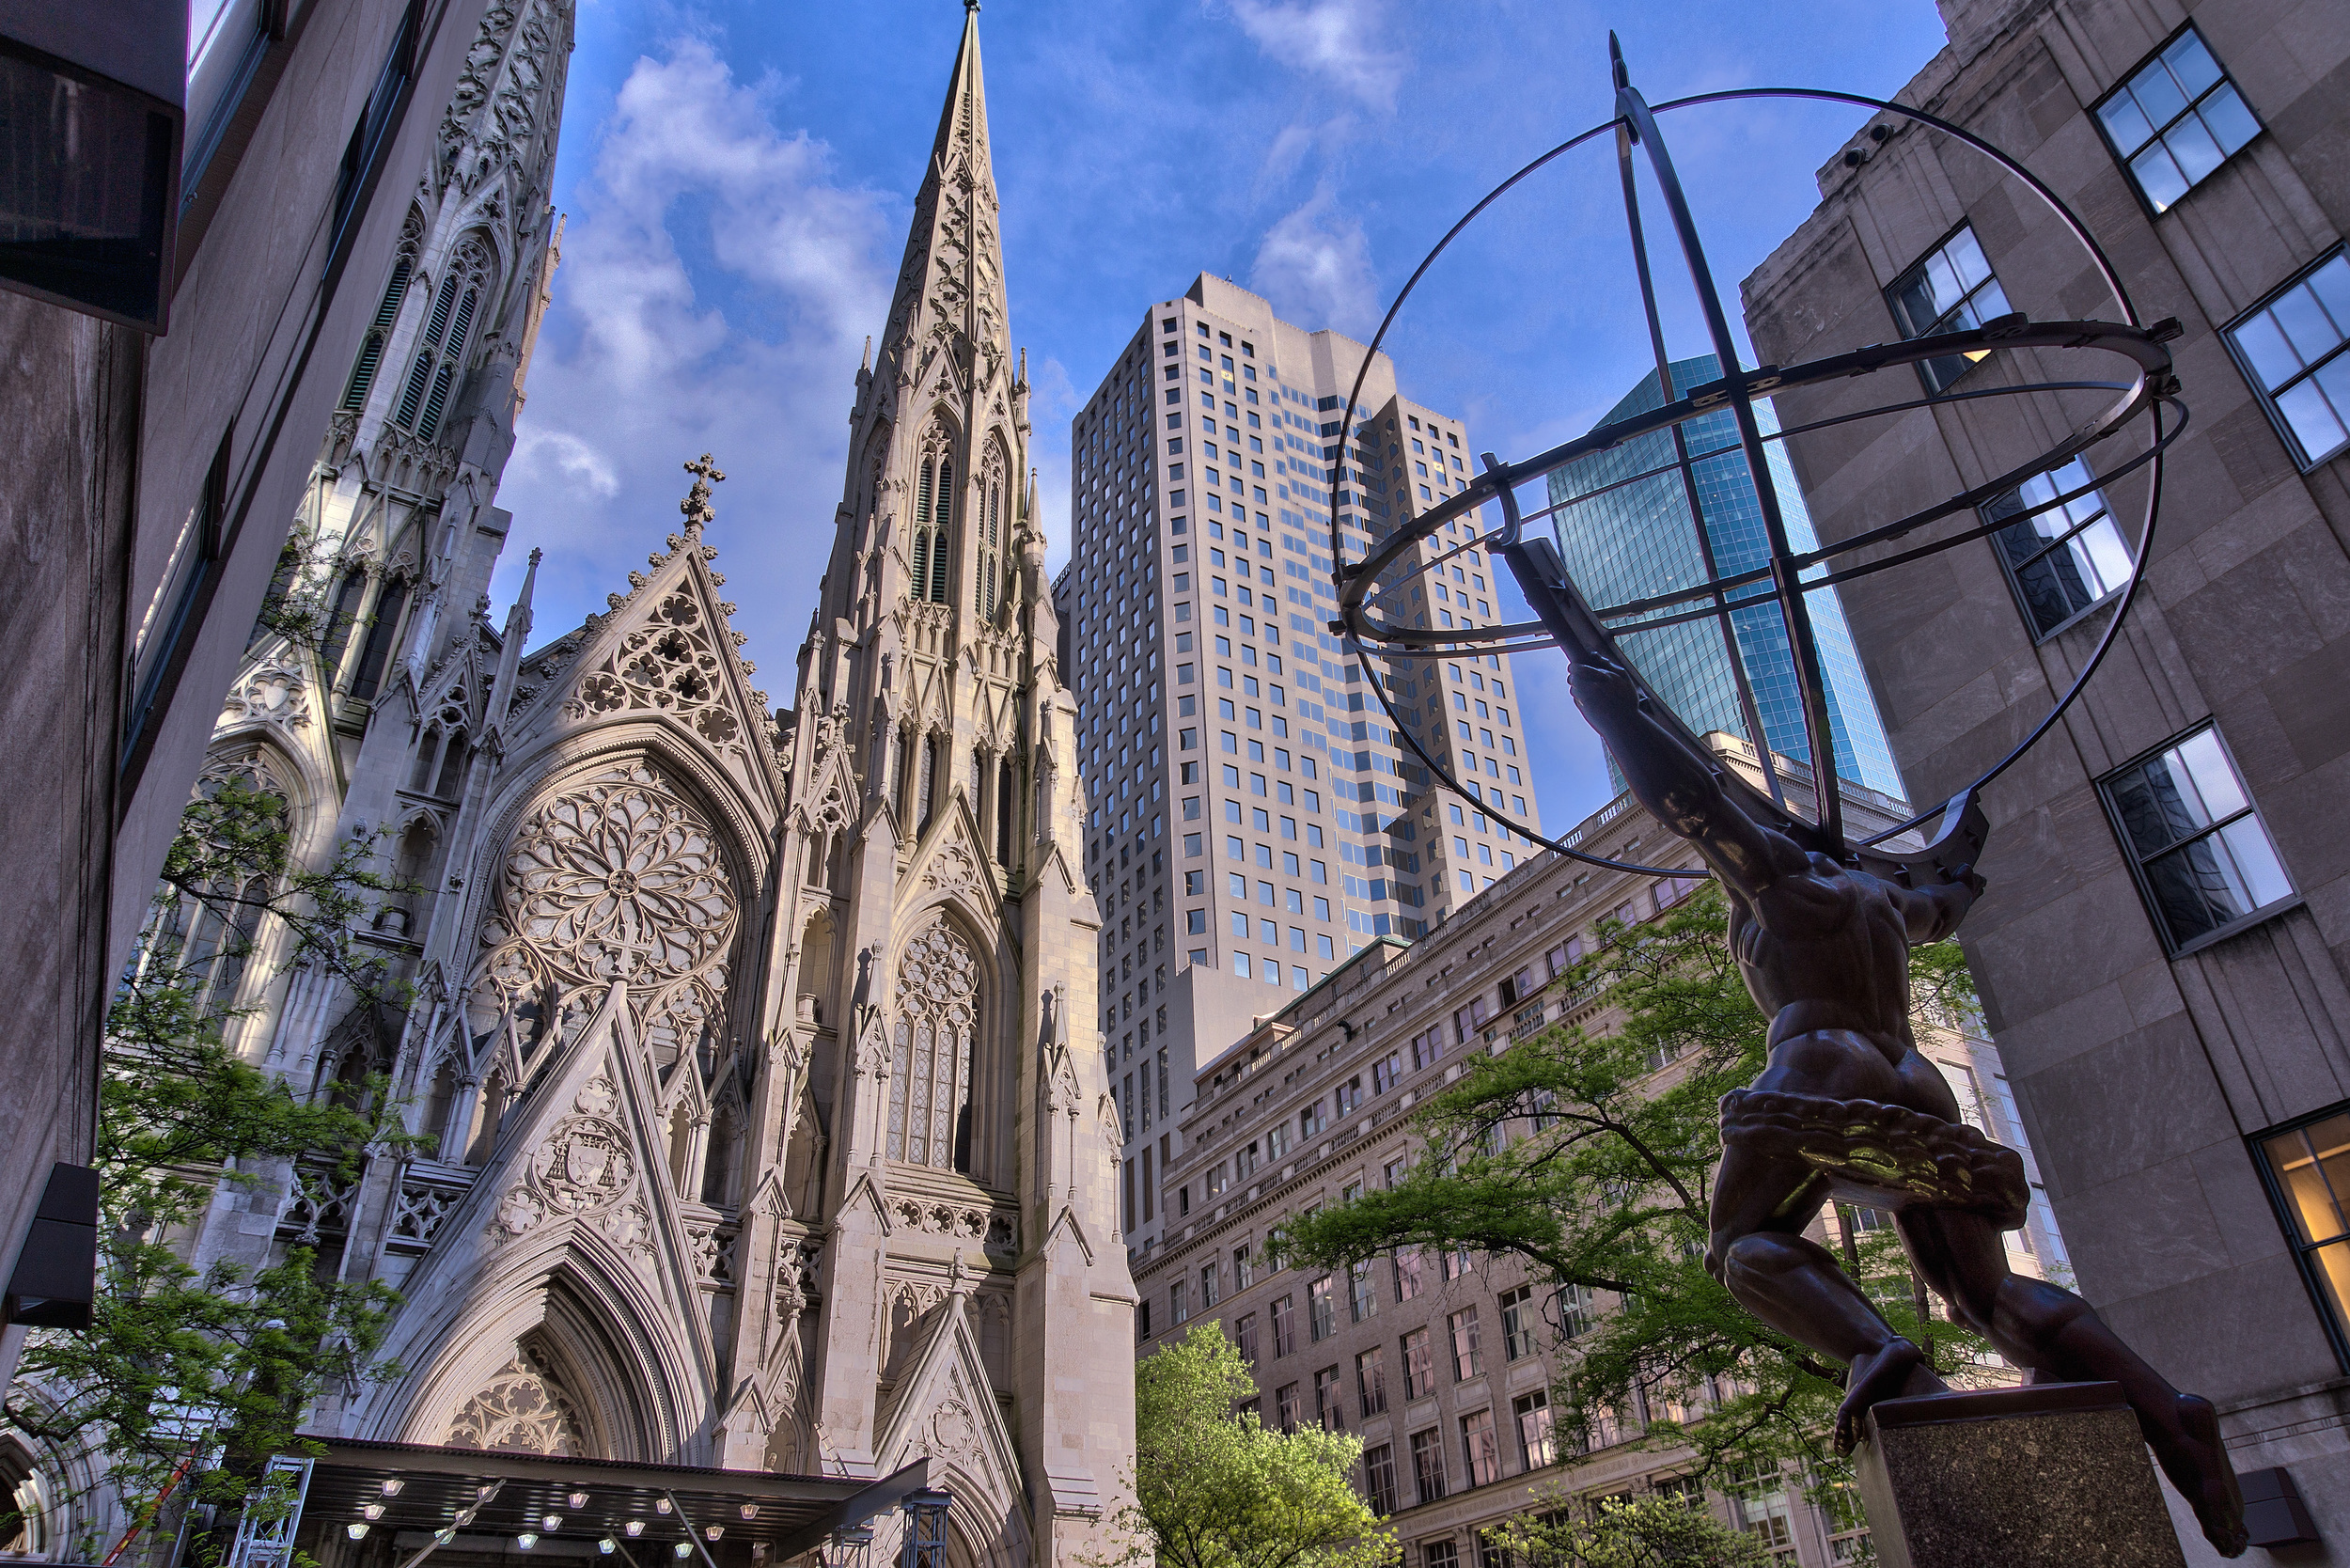 NYC_-_St_Patrick_Cathedral_-_Facade_and_Atlas.jpg